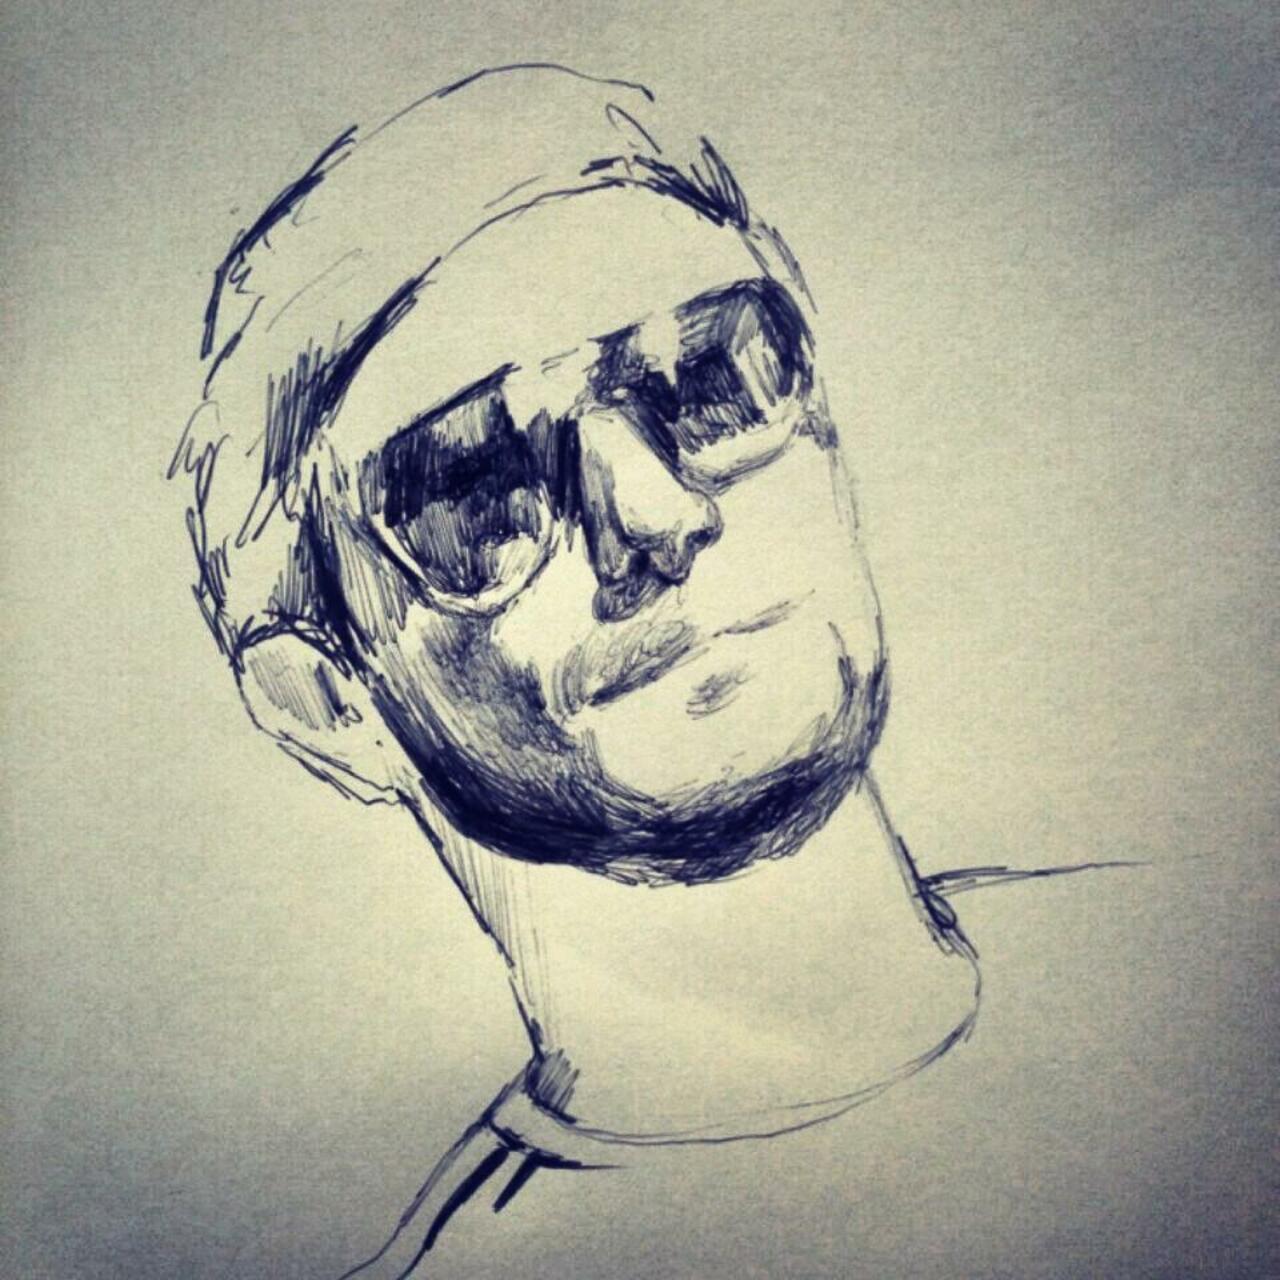 **RT and follow to receive your own twitter portrait** 20% to @BCCare #ART #biro @MrMCJonesPE http://t.co/AXd4Vcf5Iy